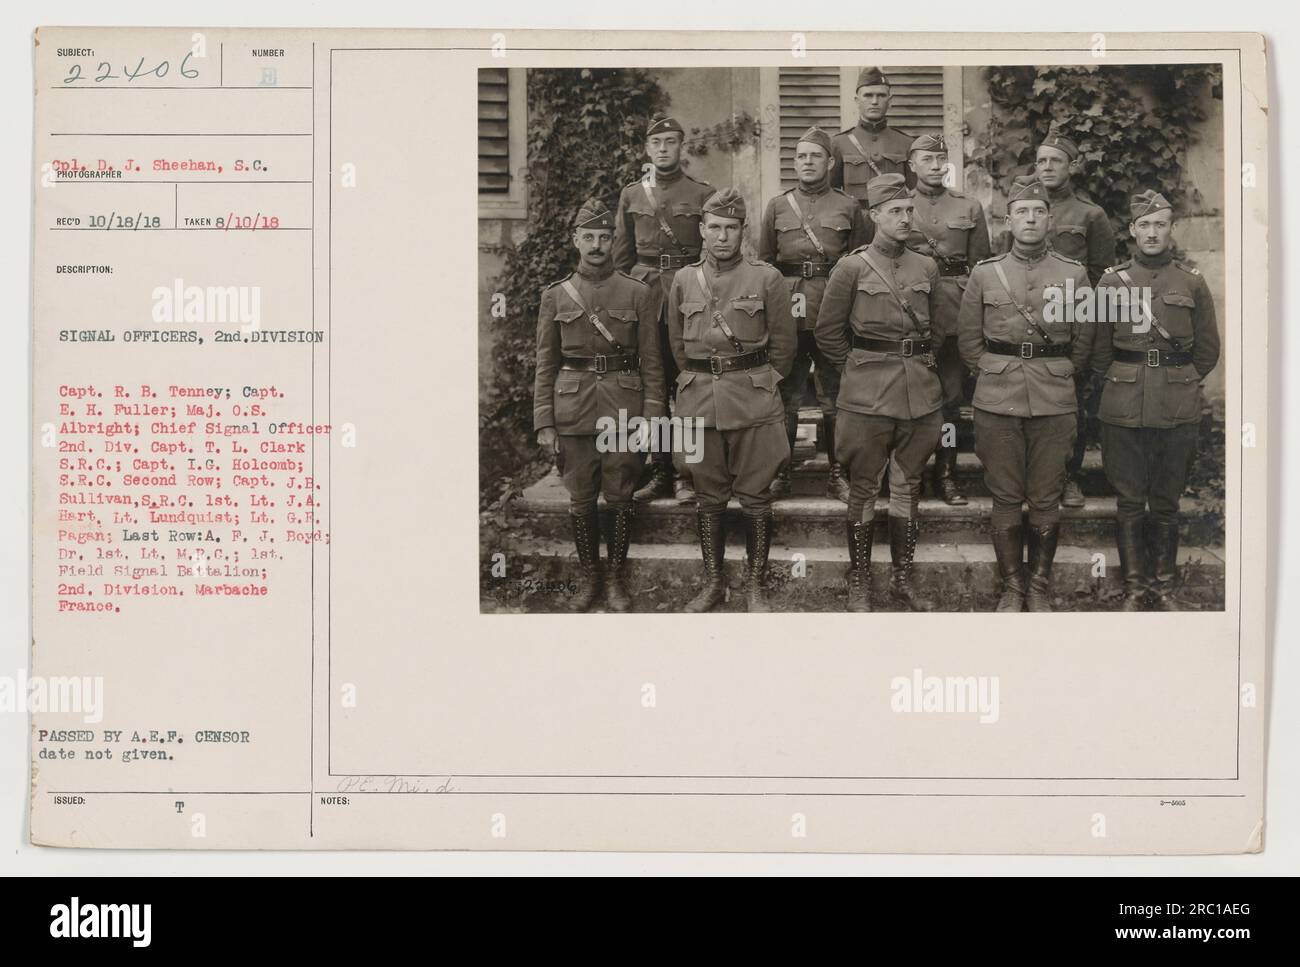 SIGNAL OFFICERS of the 2nd Division featured in this image include: Capt. R. B. Tenney, Capt. E. H. Puller, Maj. 0.8. Albright, Chief Signal officer 2nd. Div. Capt. T. L. Clark S.R.C., Capt. I.G. Holcomb. In the second row are Capt. J.E. Sullivan, S.R.C., 1st. Lt. J.A. Hart, Lt. Lundquist, and Lt. G. E. Pagan. The last row consists of A. P. J. Bogd Dr. lat. Lt. M.R.C. This photo was taken in Marbache, France during World War One. It was passed by A.E.F. censor, but the date of issuance is unspecified. Stock Photo